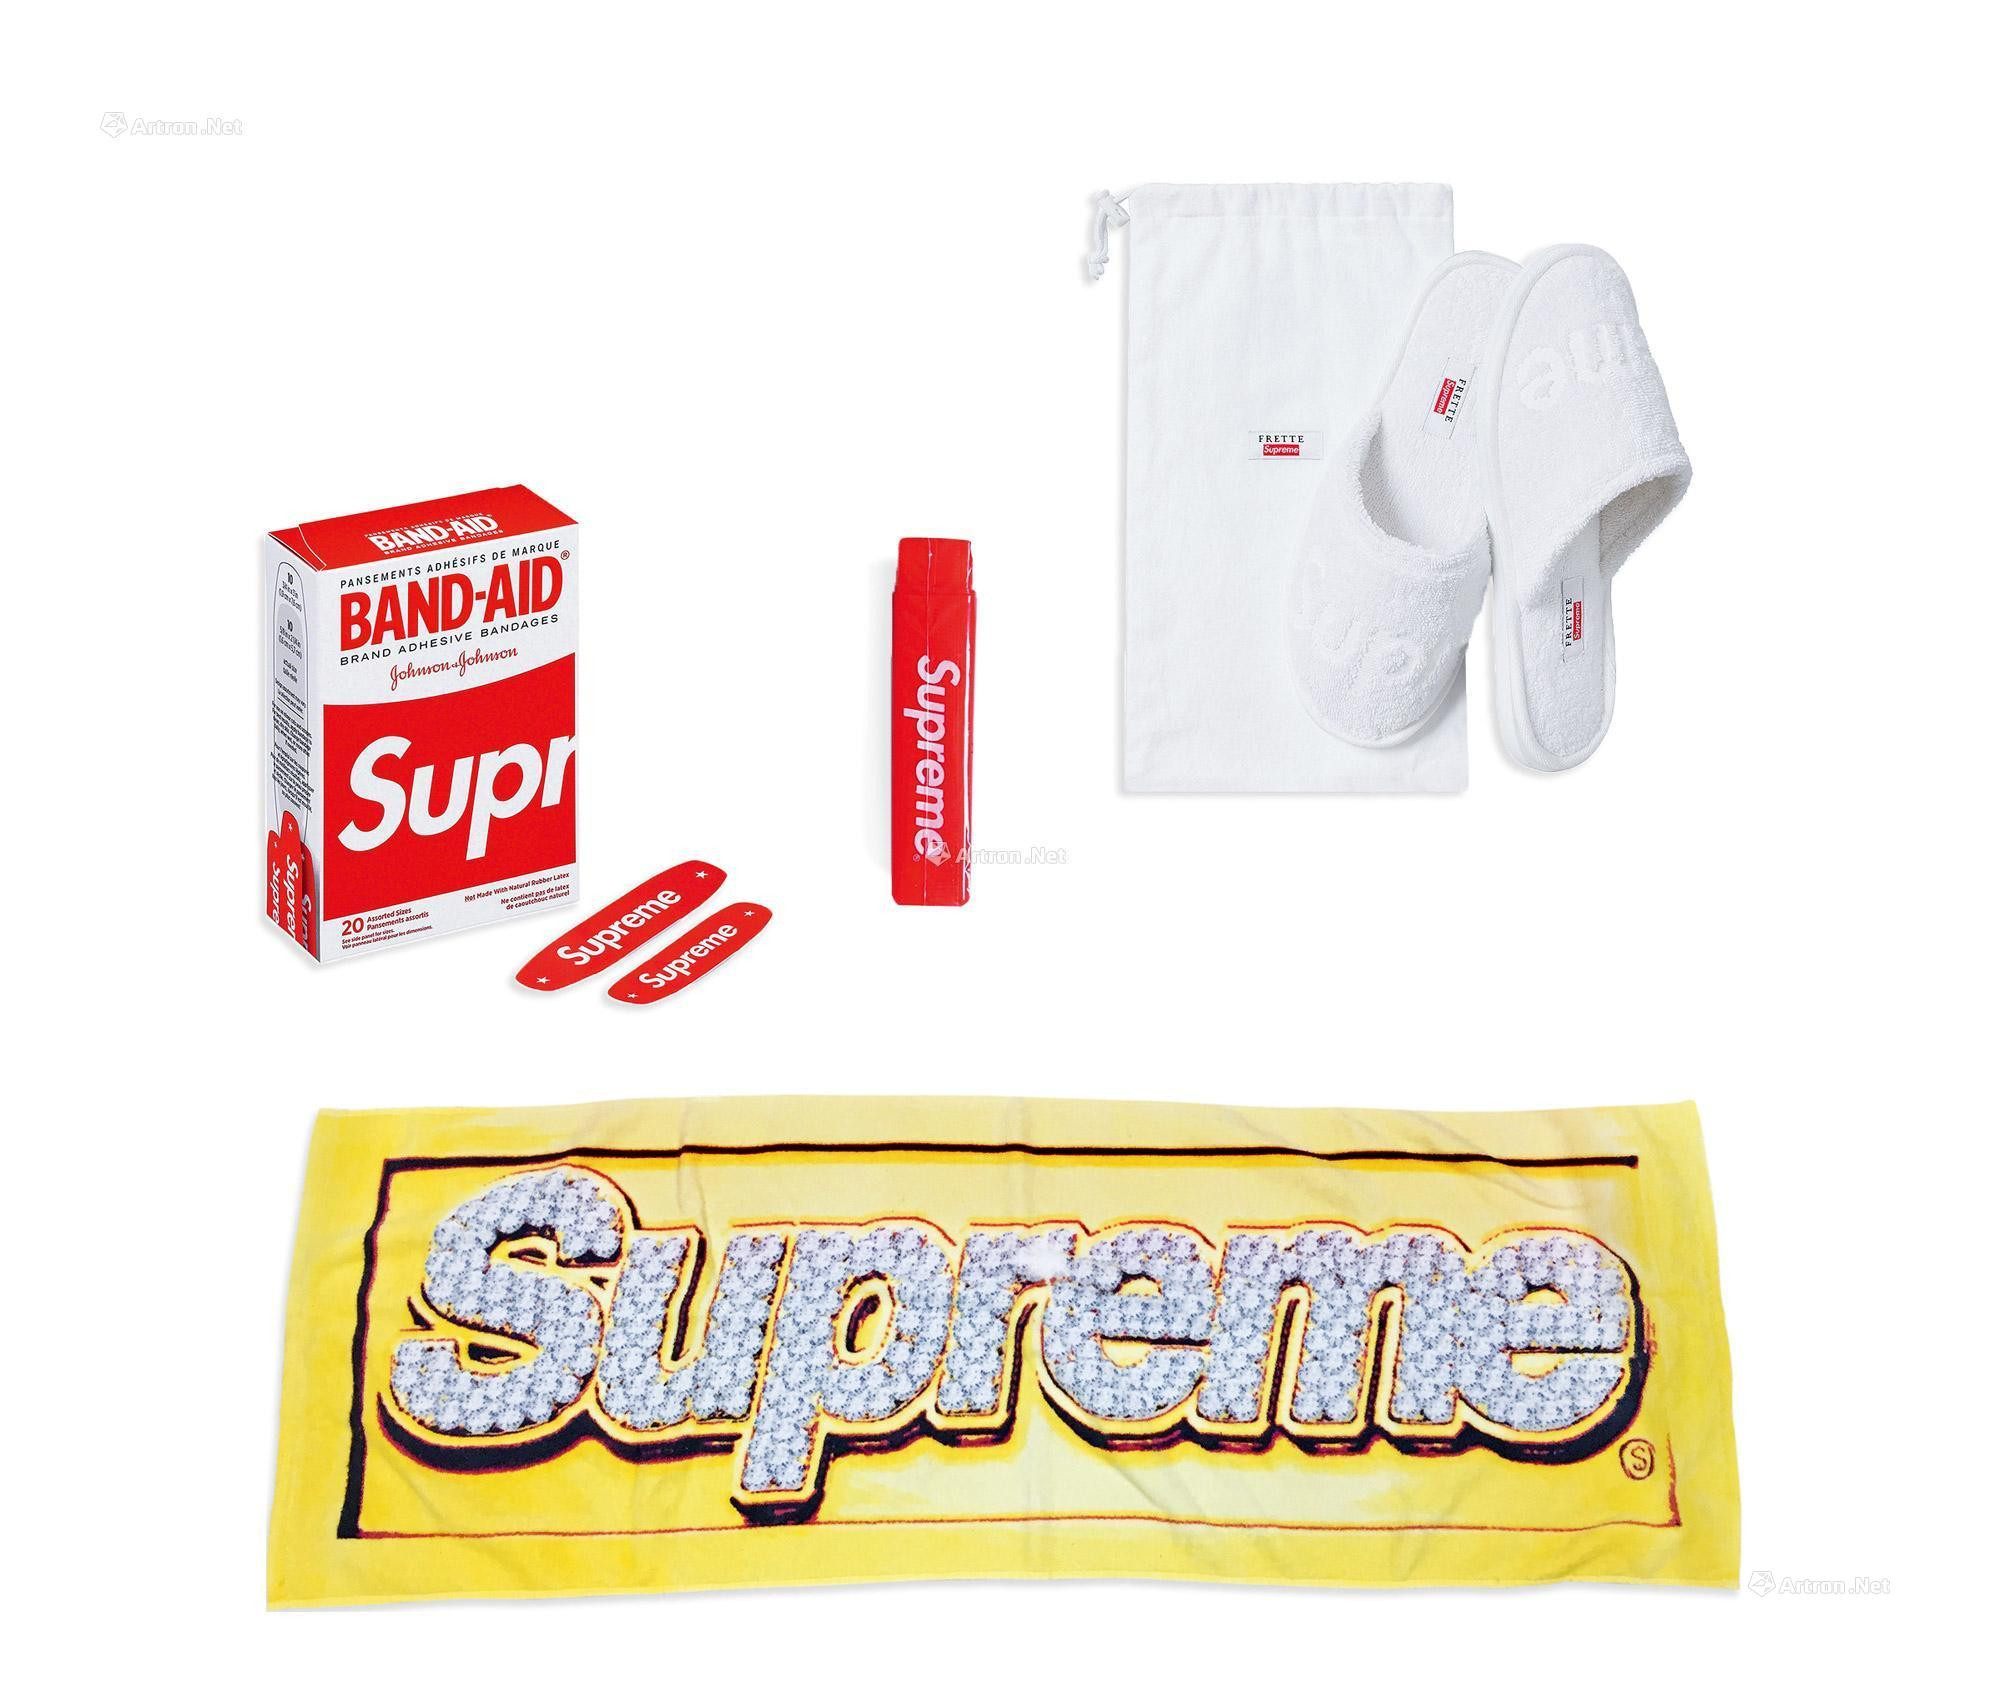 SUPREME　TOOTHBRUSH（RED）　BLING TOWEL（GOLD）　FRETTE SLIPPERS（WHITE）　SUPREME X BAND-AID ADHESIVE BANDAGES（BOX OF 20，RED）